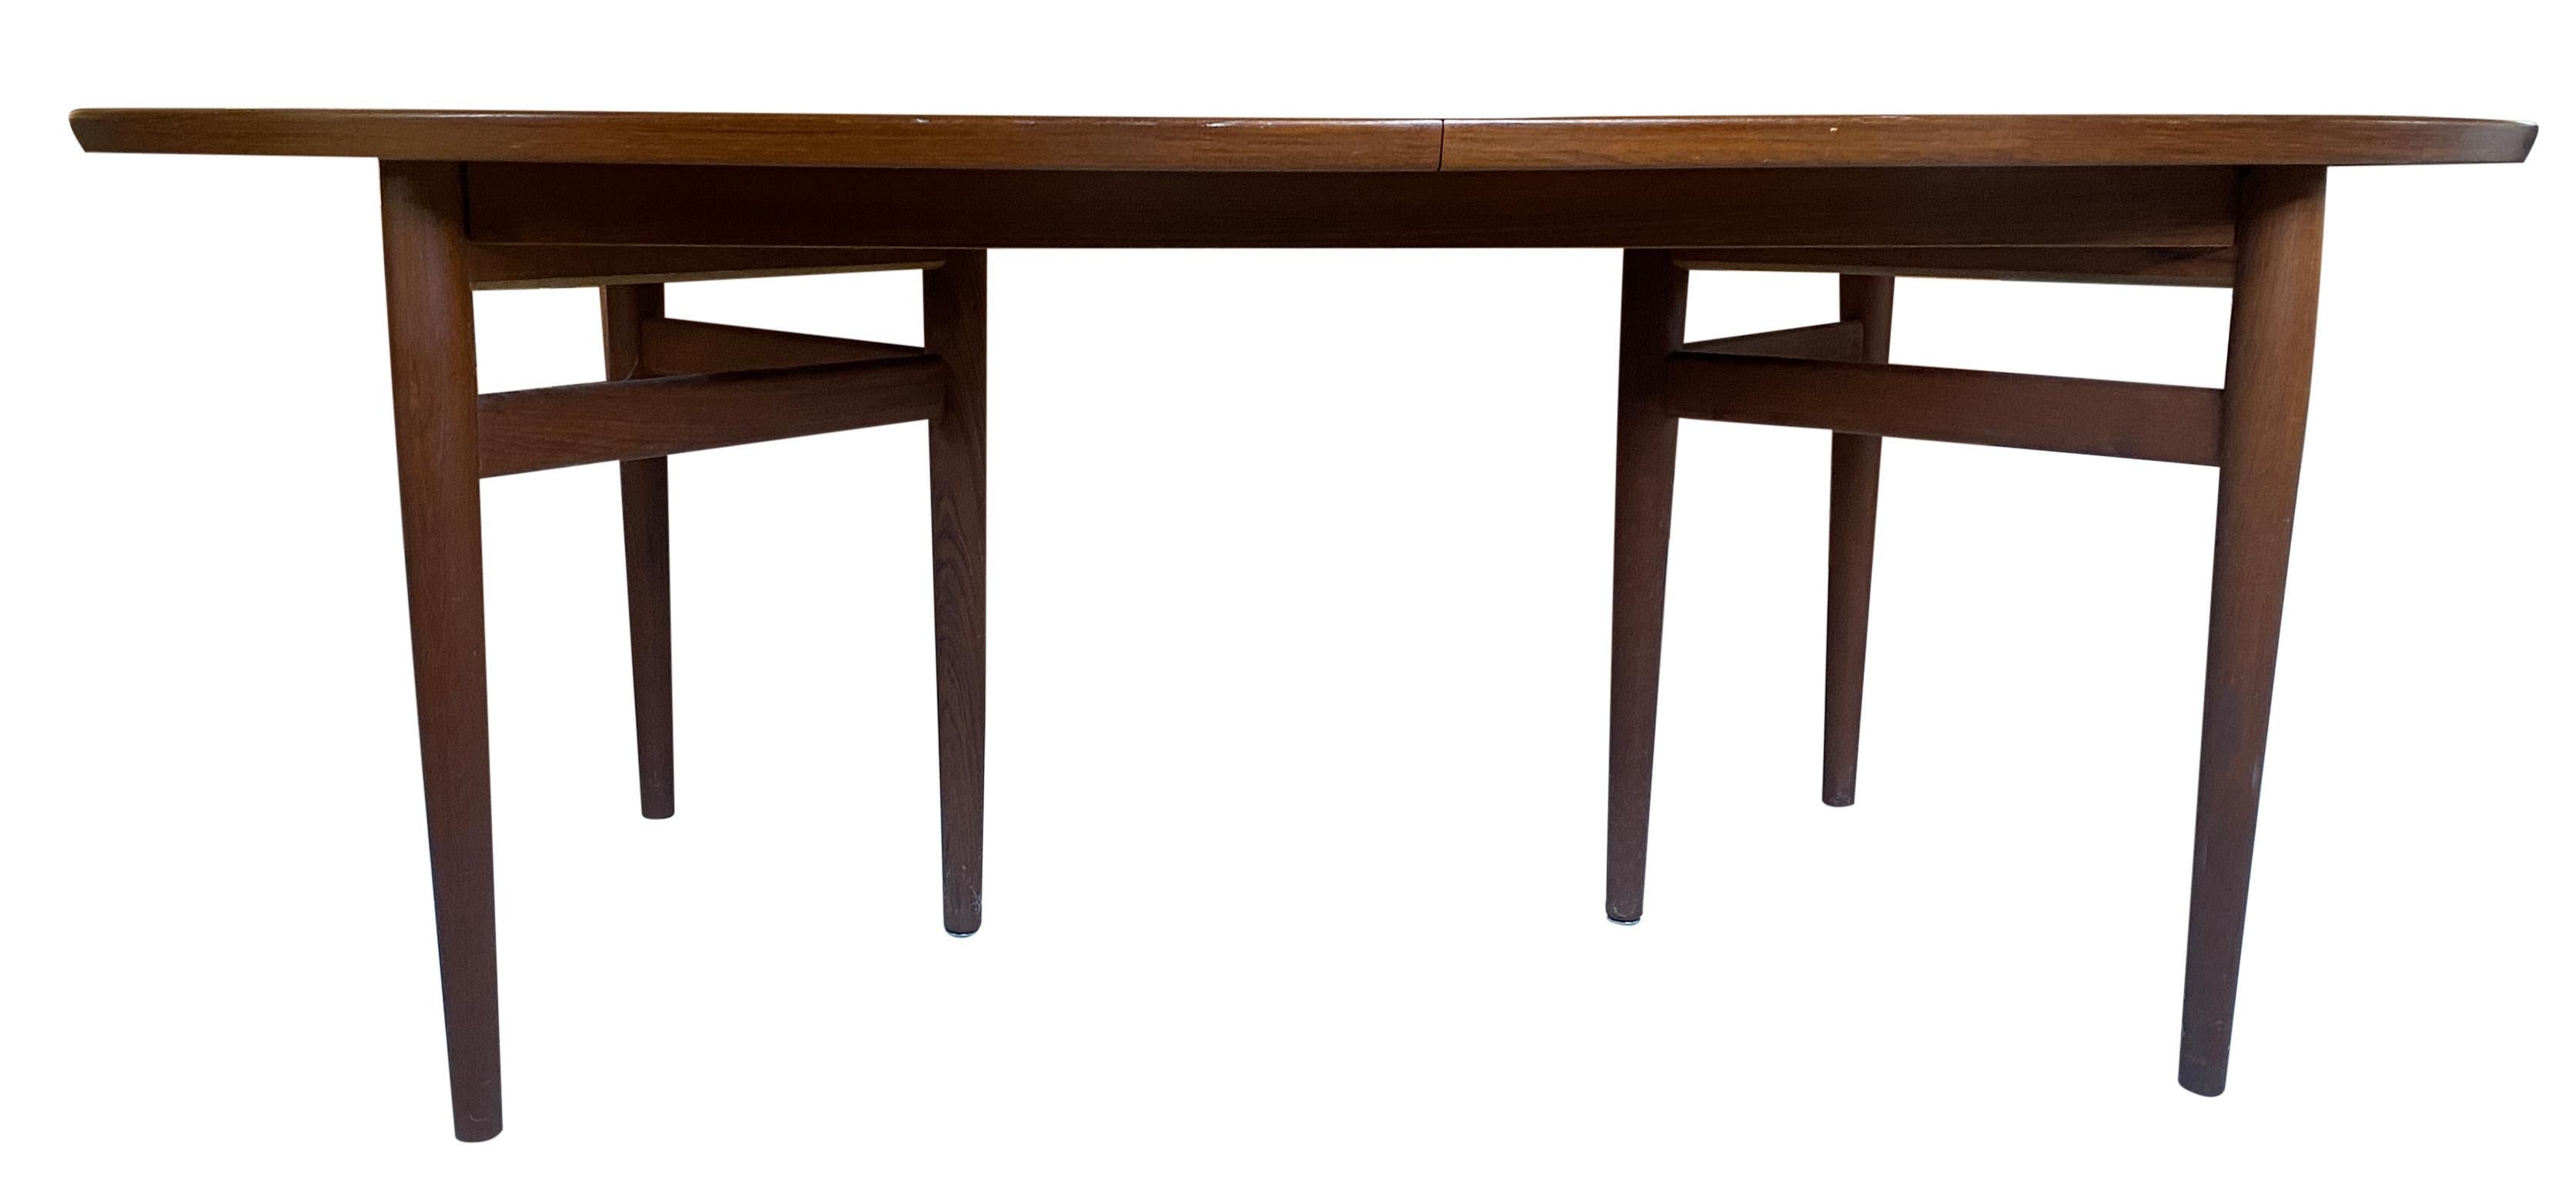 Midcentury teak elliptical oval Danish extension dining table with (2) leaves designed by Arne Vodder. Model no. 212. Made by sibast in Denmark. This table is very high quality hand built in Denmark. Solid teak tripod legs. This table is in